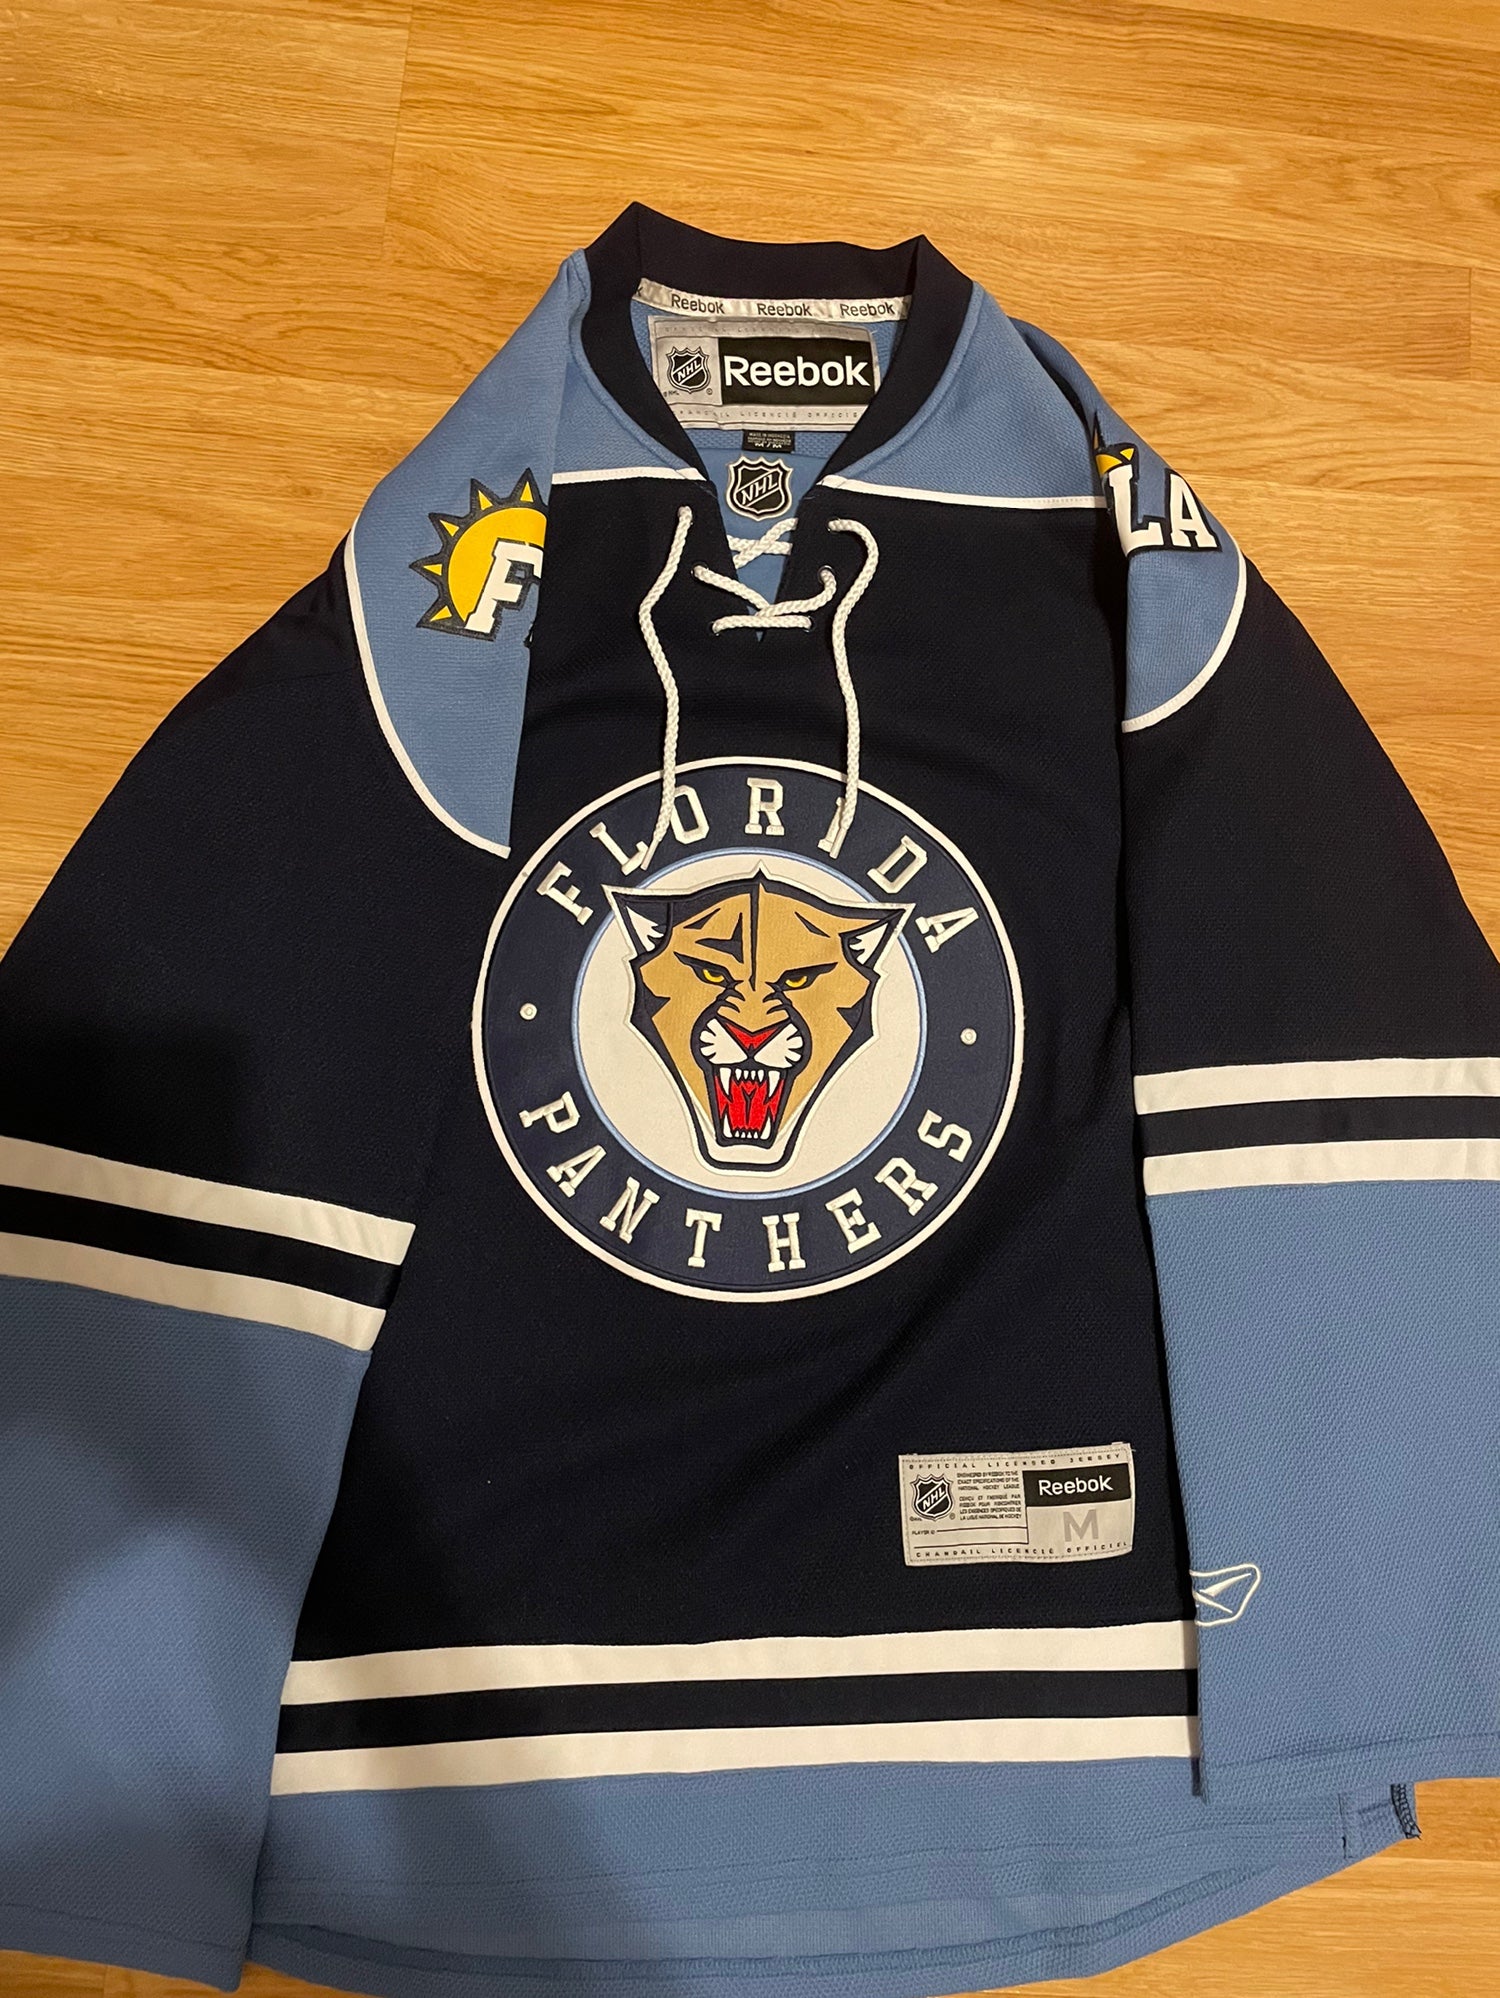 It's a 'JetBlue' Reverse Retro for the Florida Panthers